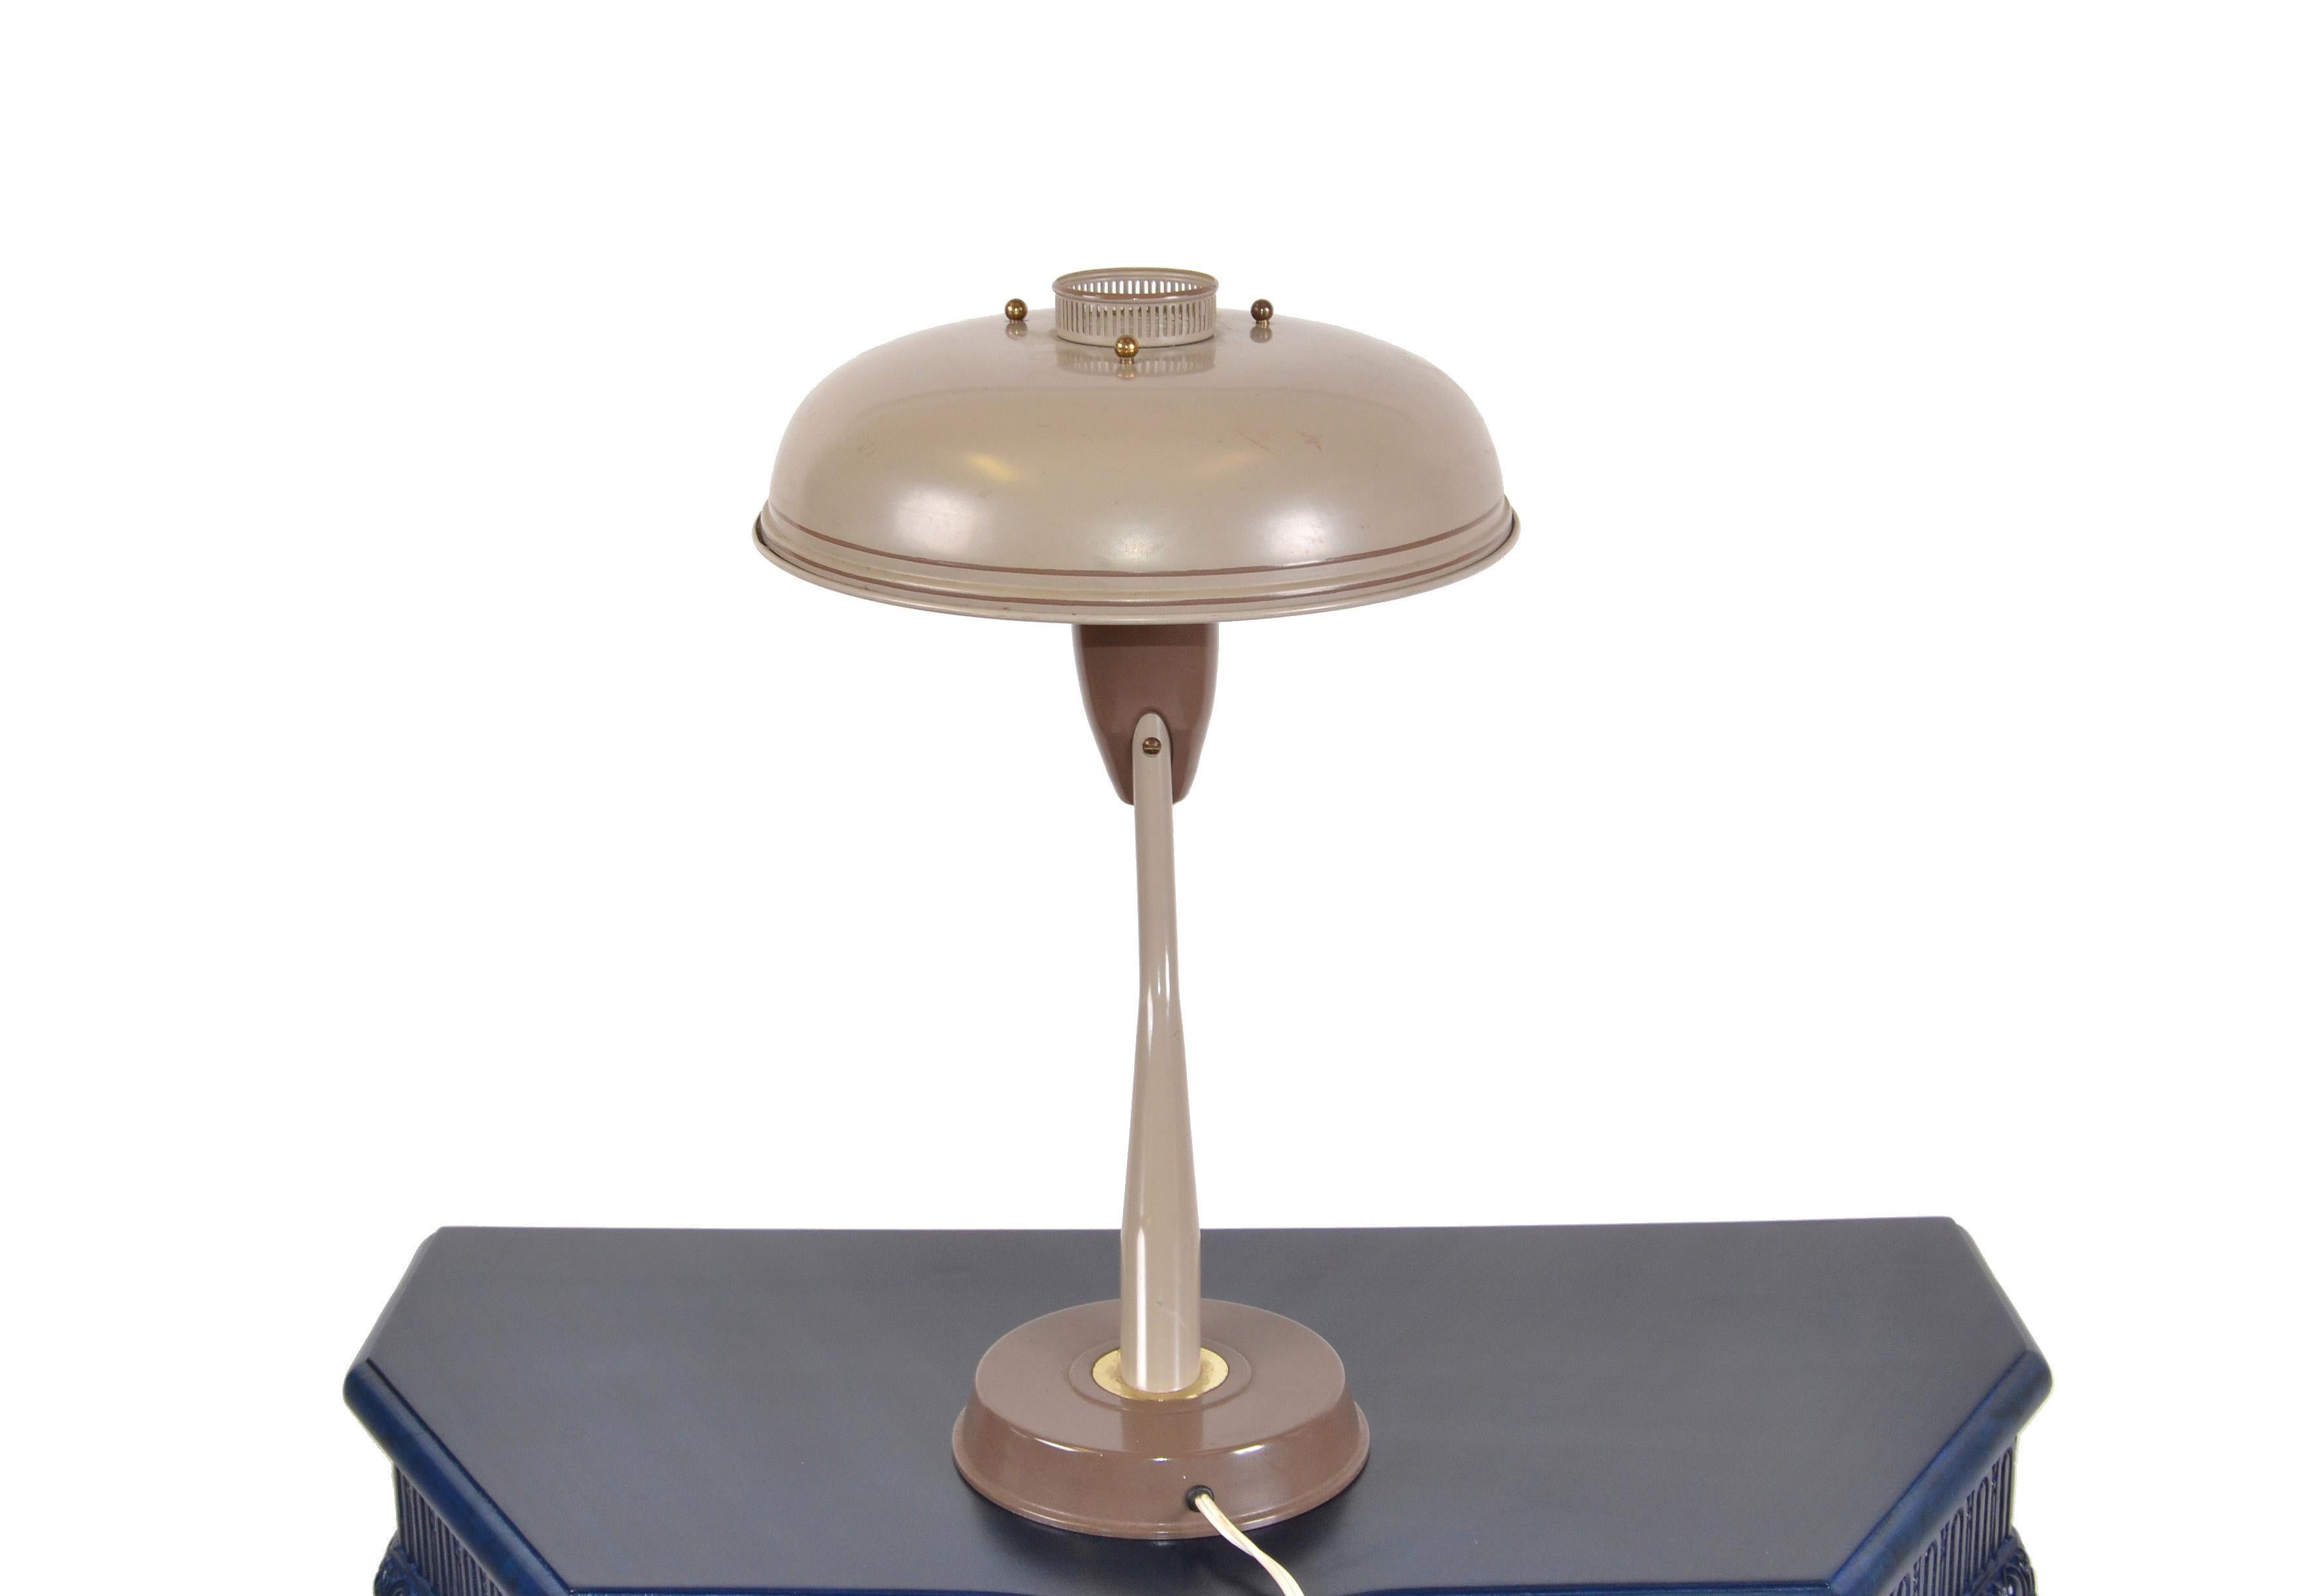  1950s Mid-Century Modern Space Age Brown Metal & Brass Flying Saucer Table Lamp For Sale 4